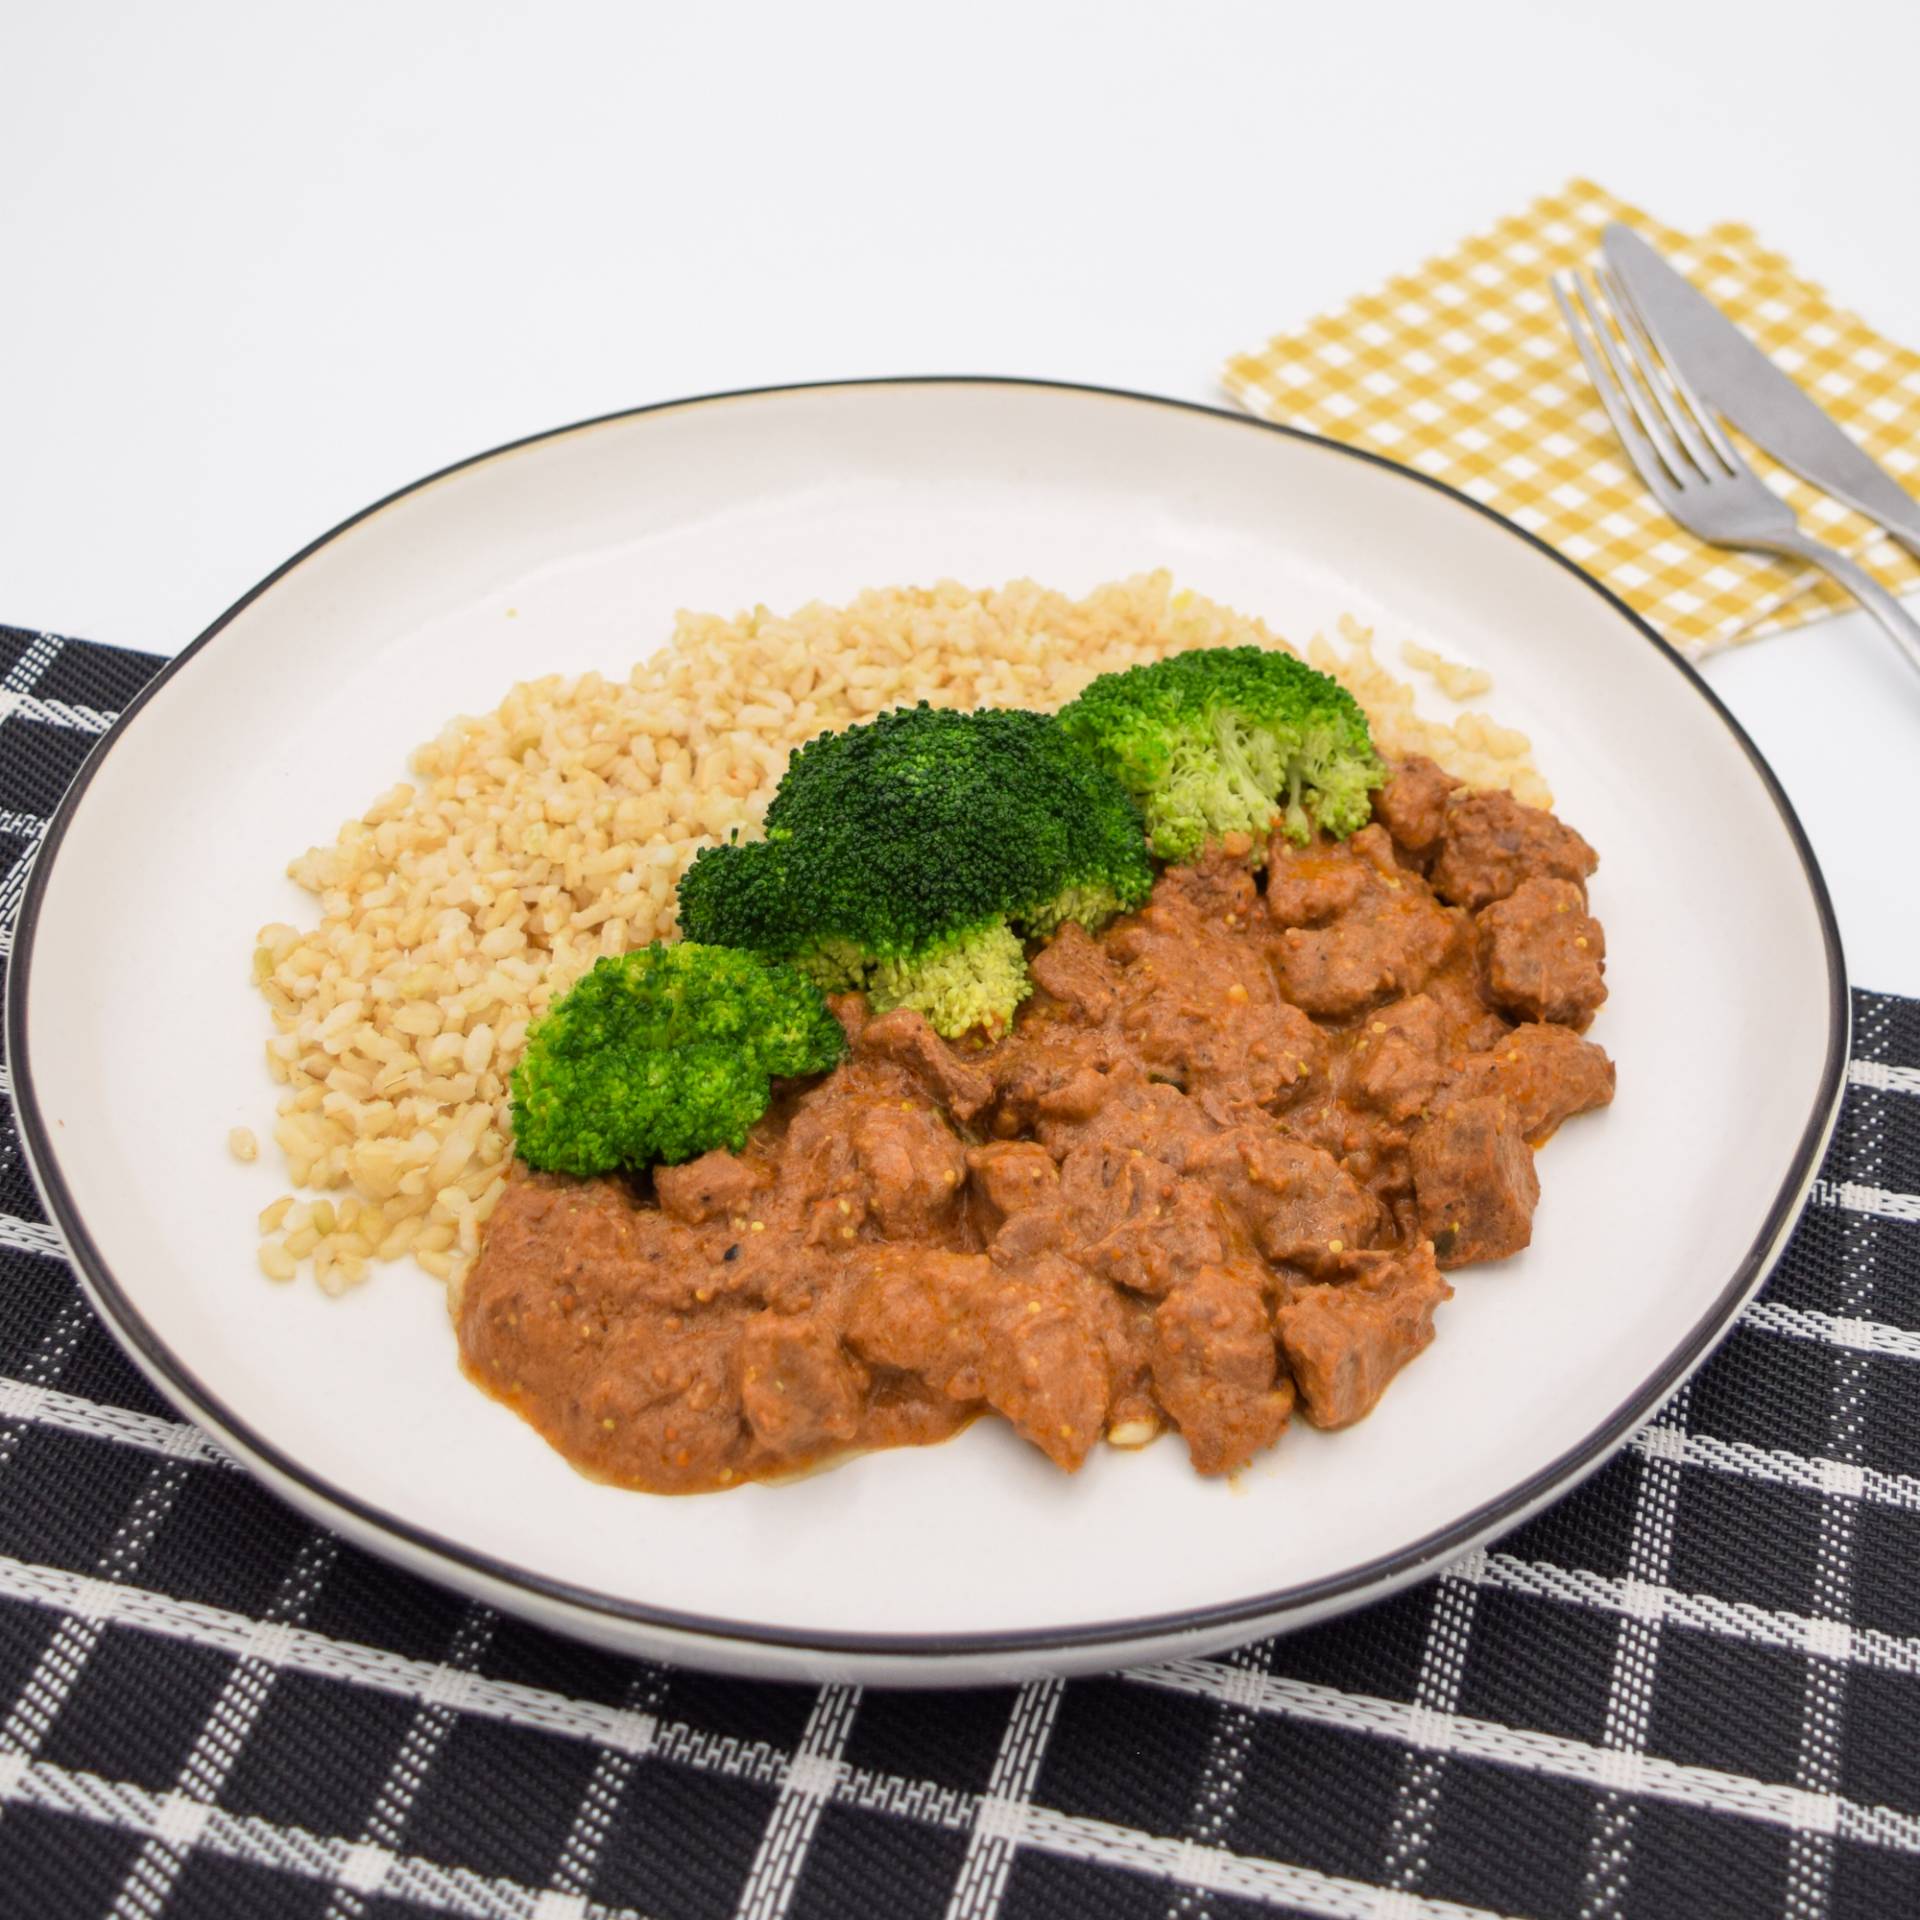 Beef stroganoff with brown rice and steamed broccoli